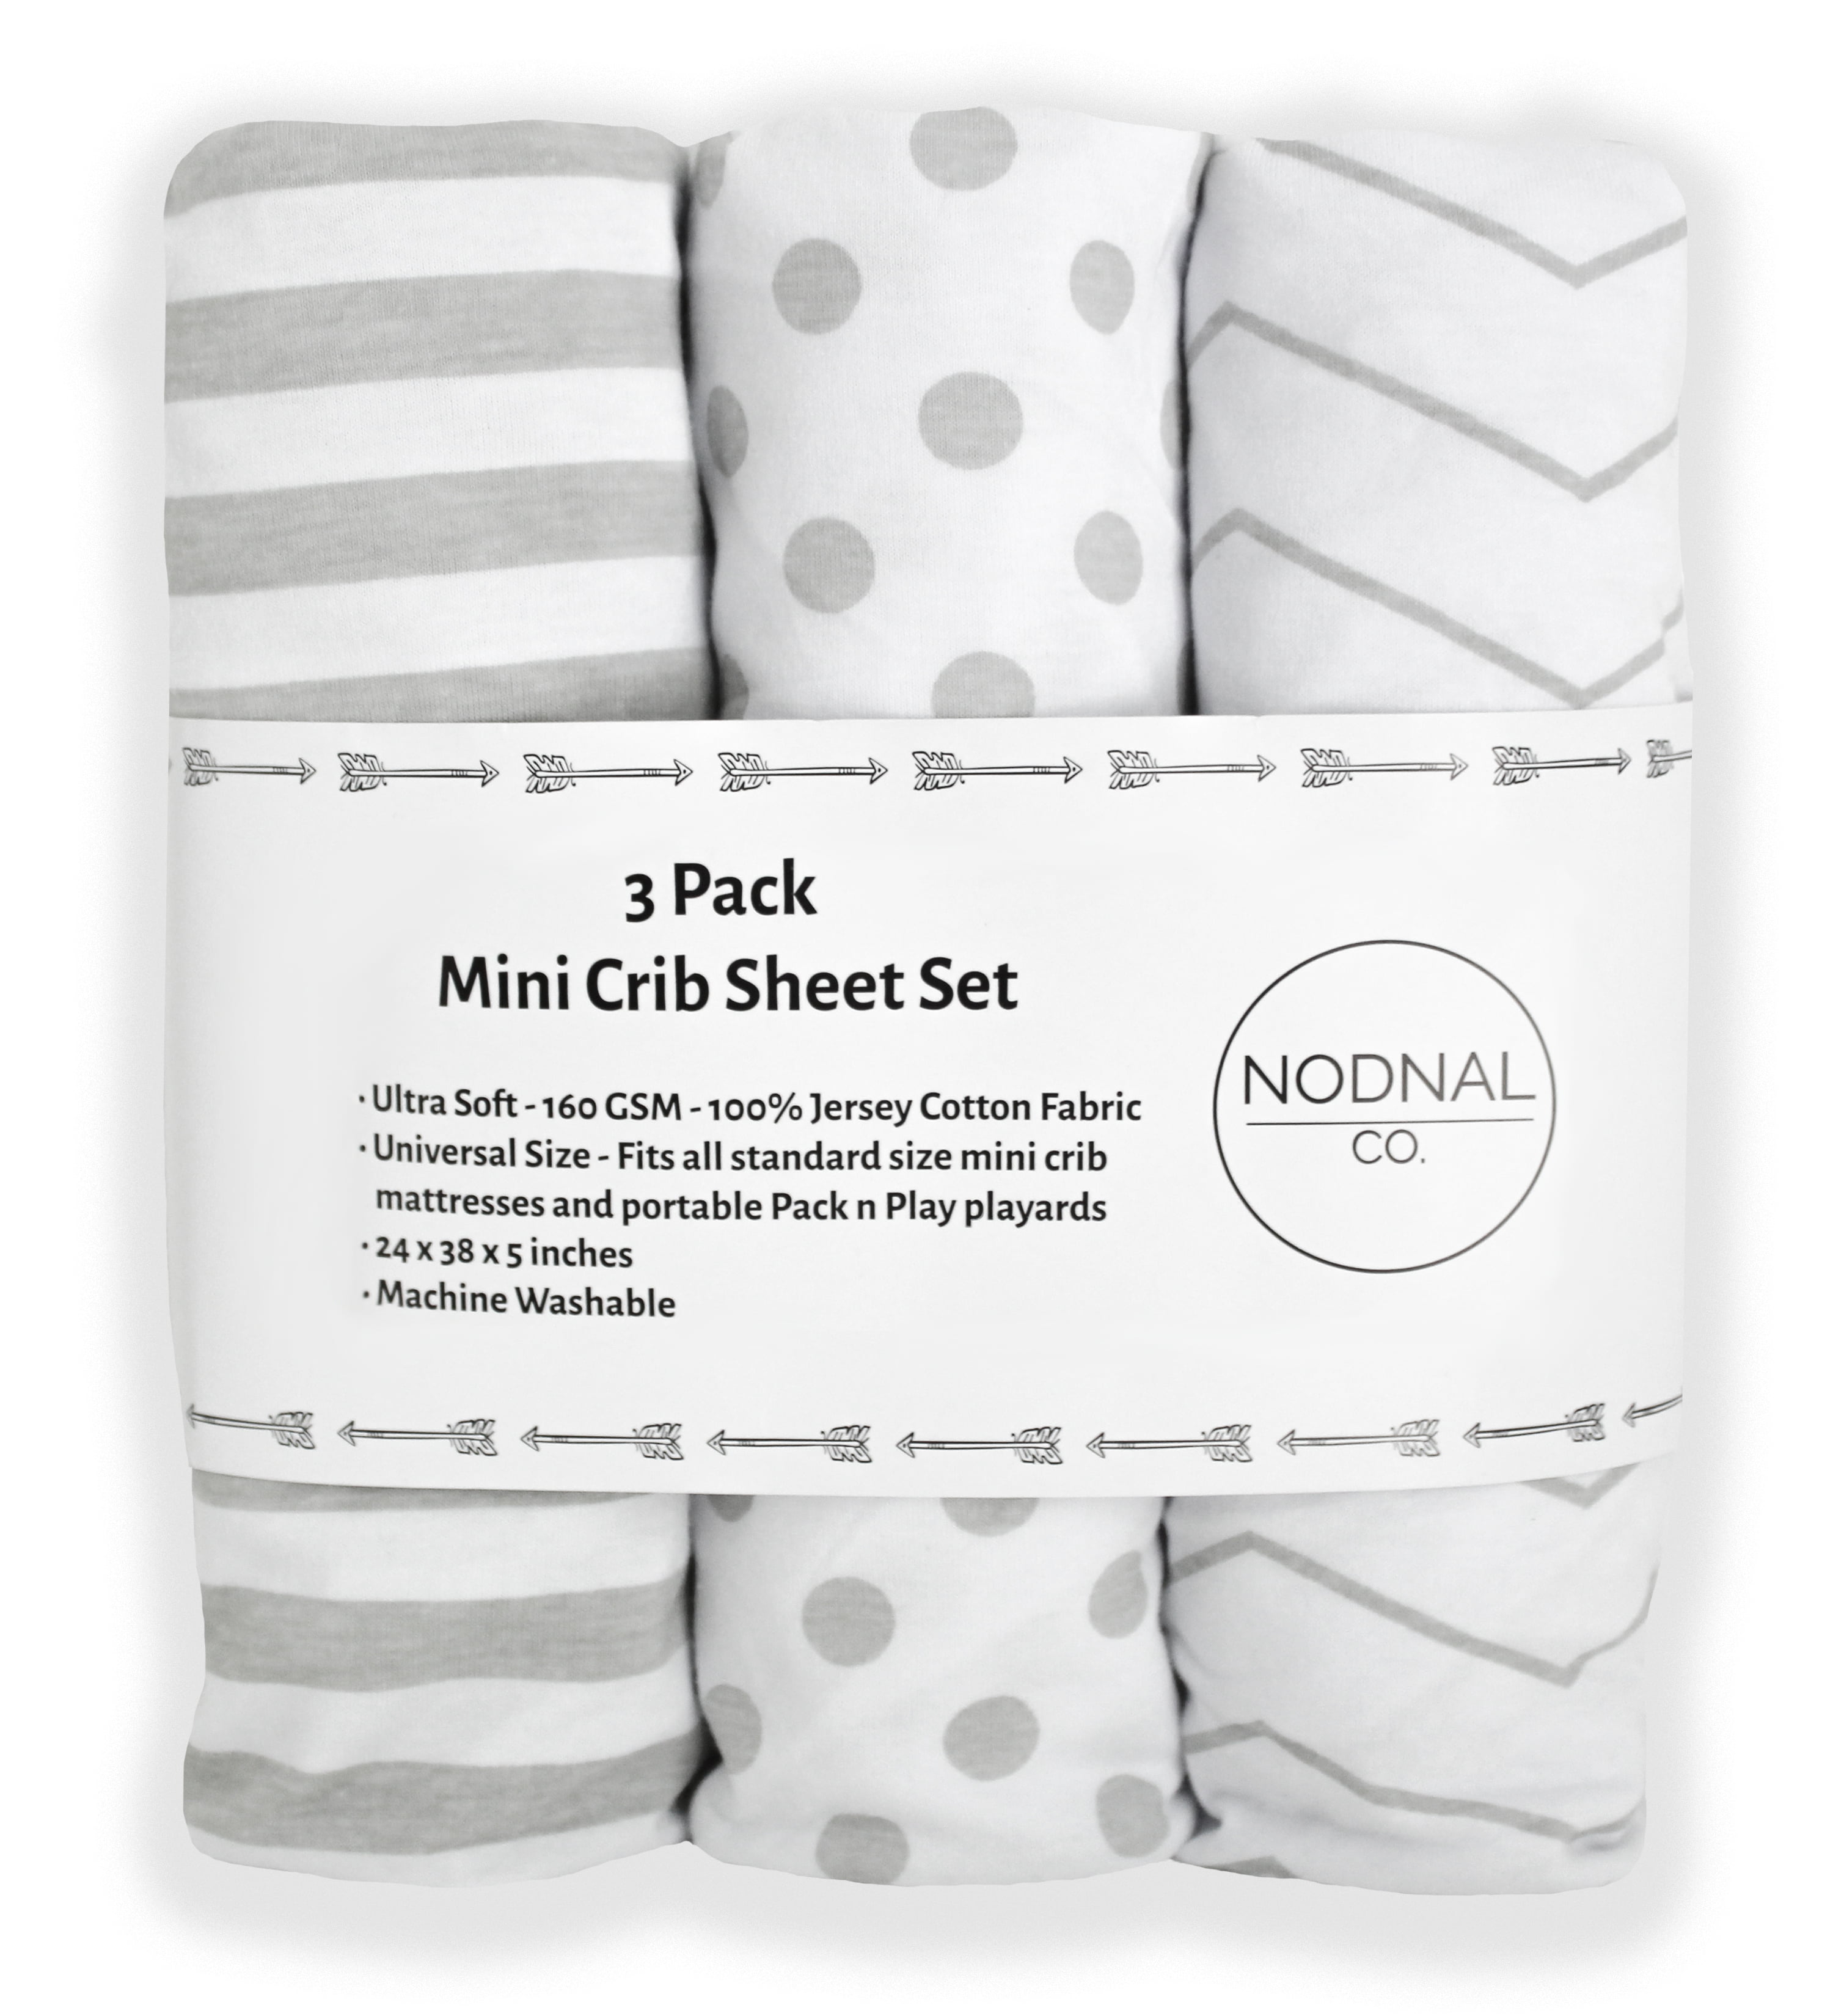 NODNAL CO Grey/White Chevron Polka Dot and Stripe 160 GSM Sheet Pack n Play Playard Portable Mini Crib Fitted Sheets Set 3 Pack 100% Jersey Knit Gray Cotton Pack and Play for Baby Girl/Boy Playpen